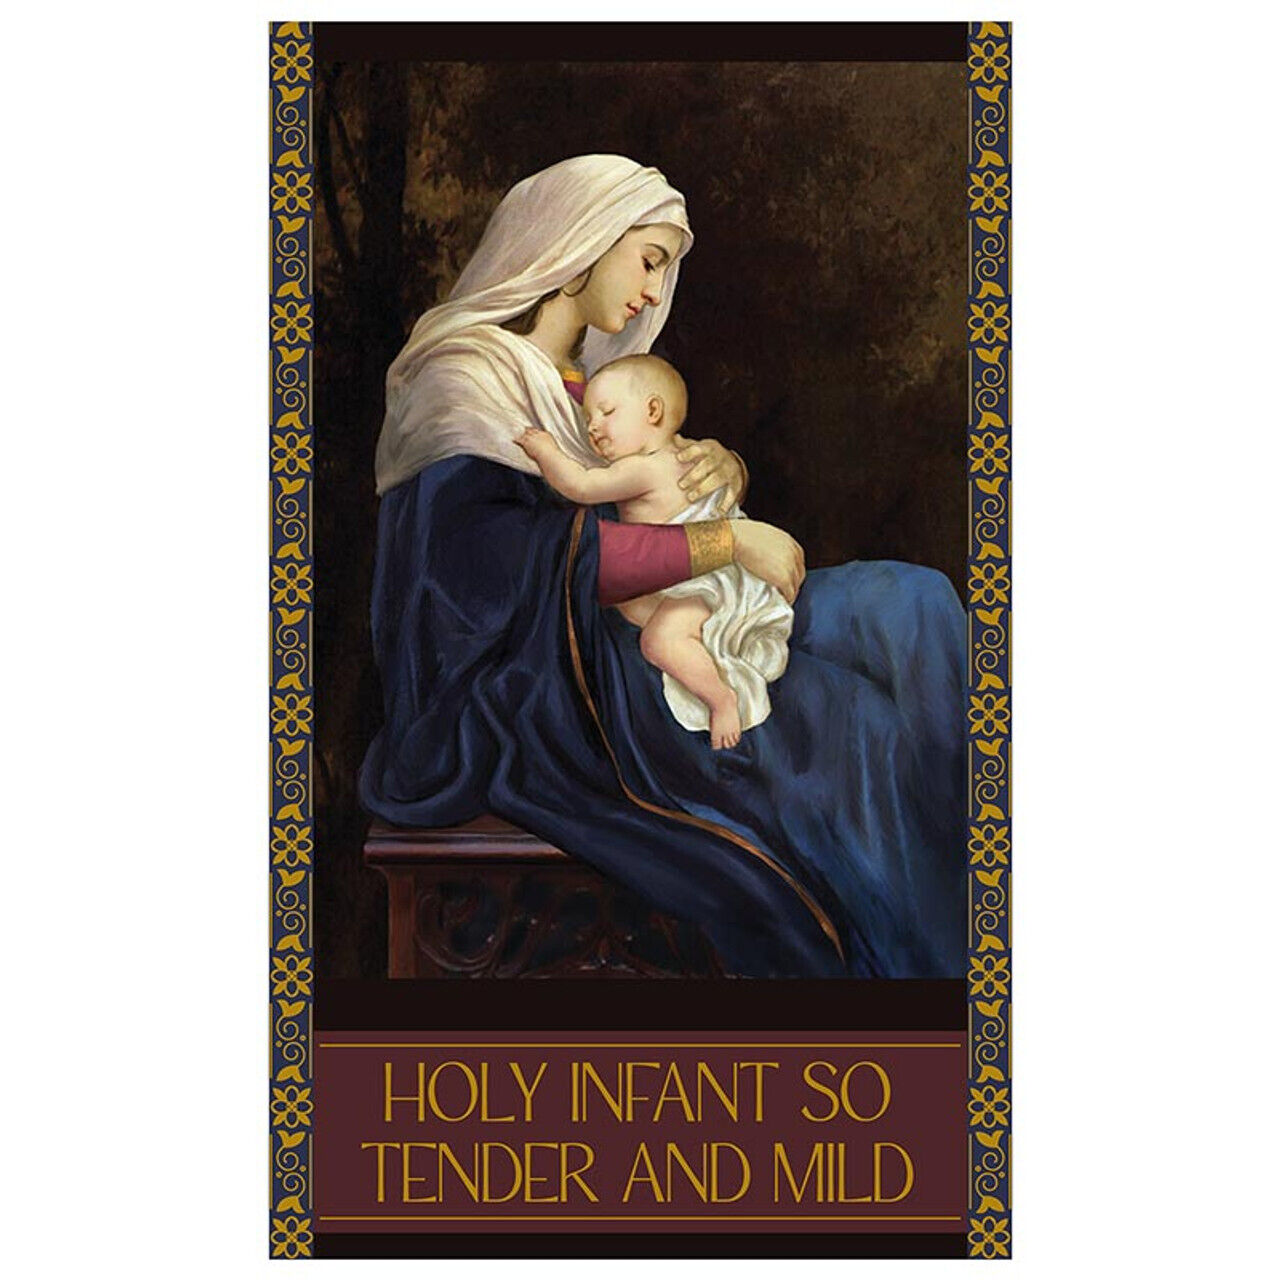 Life Series Church Banner Easter Banners 3 x 5ft Holy Infant So Tender and Mild